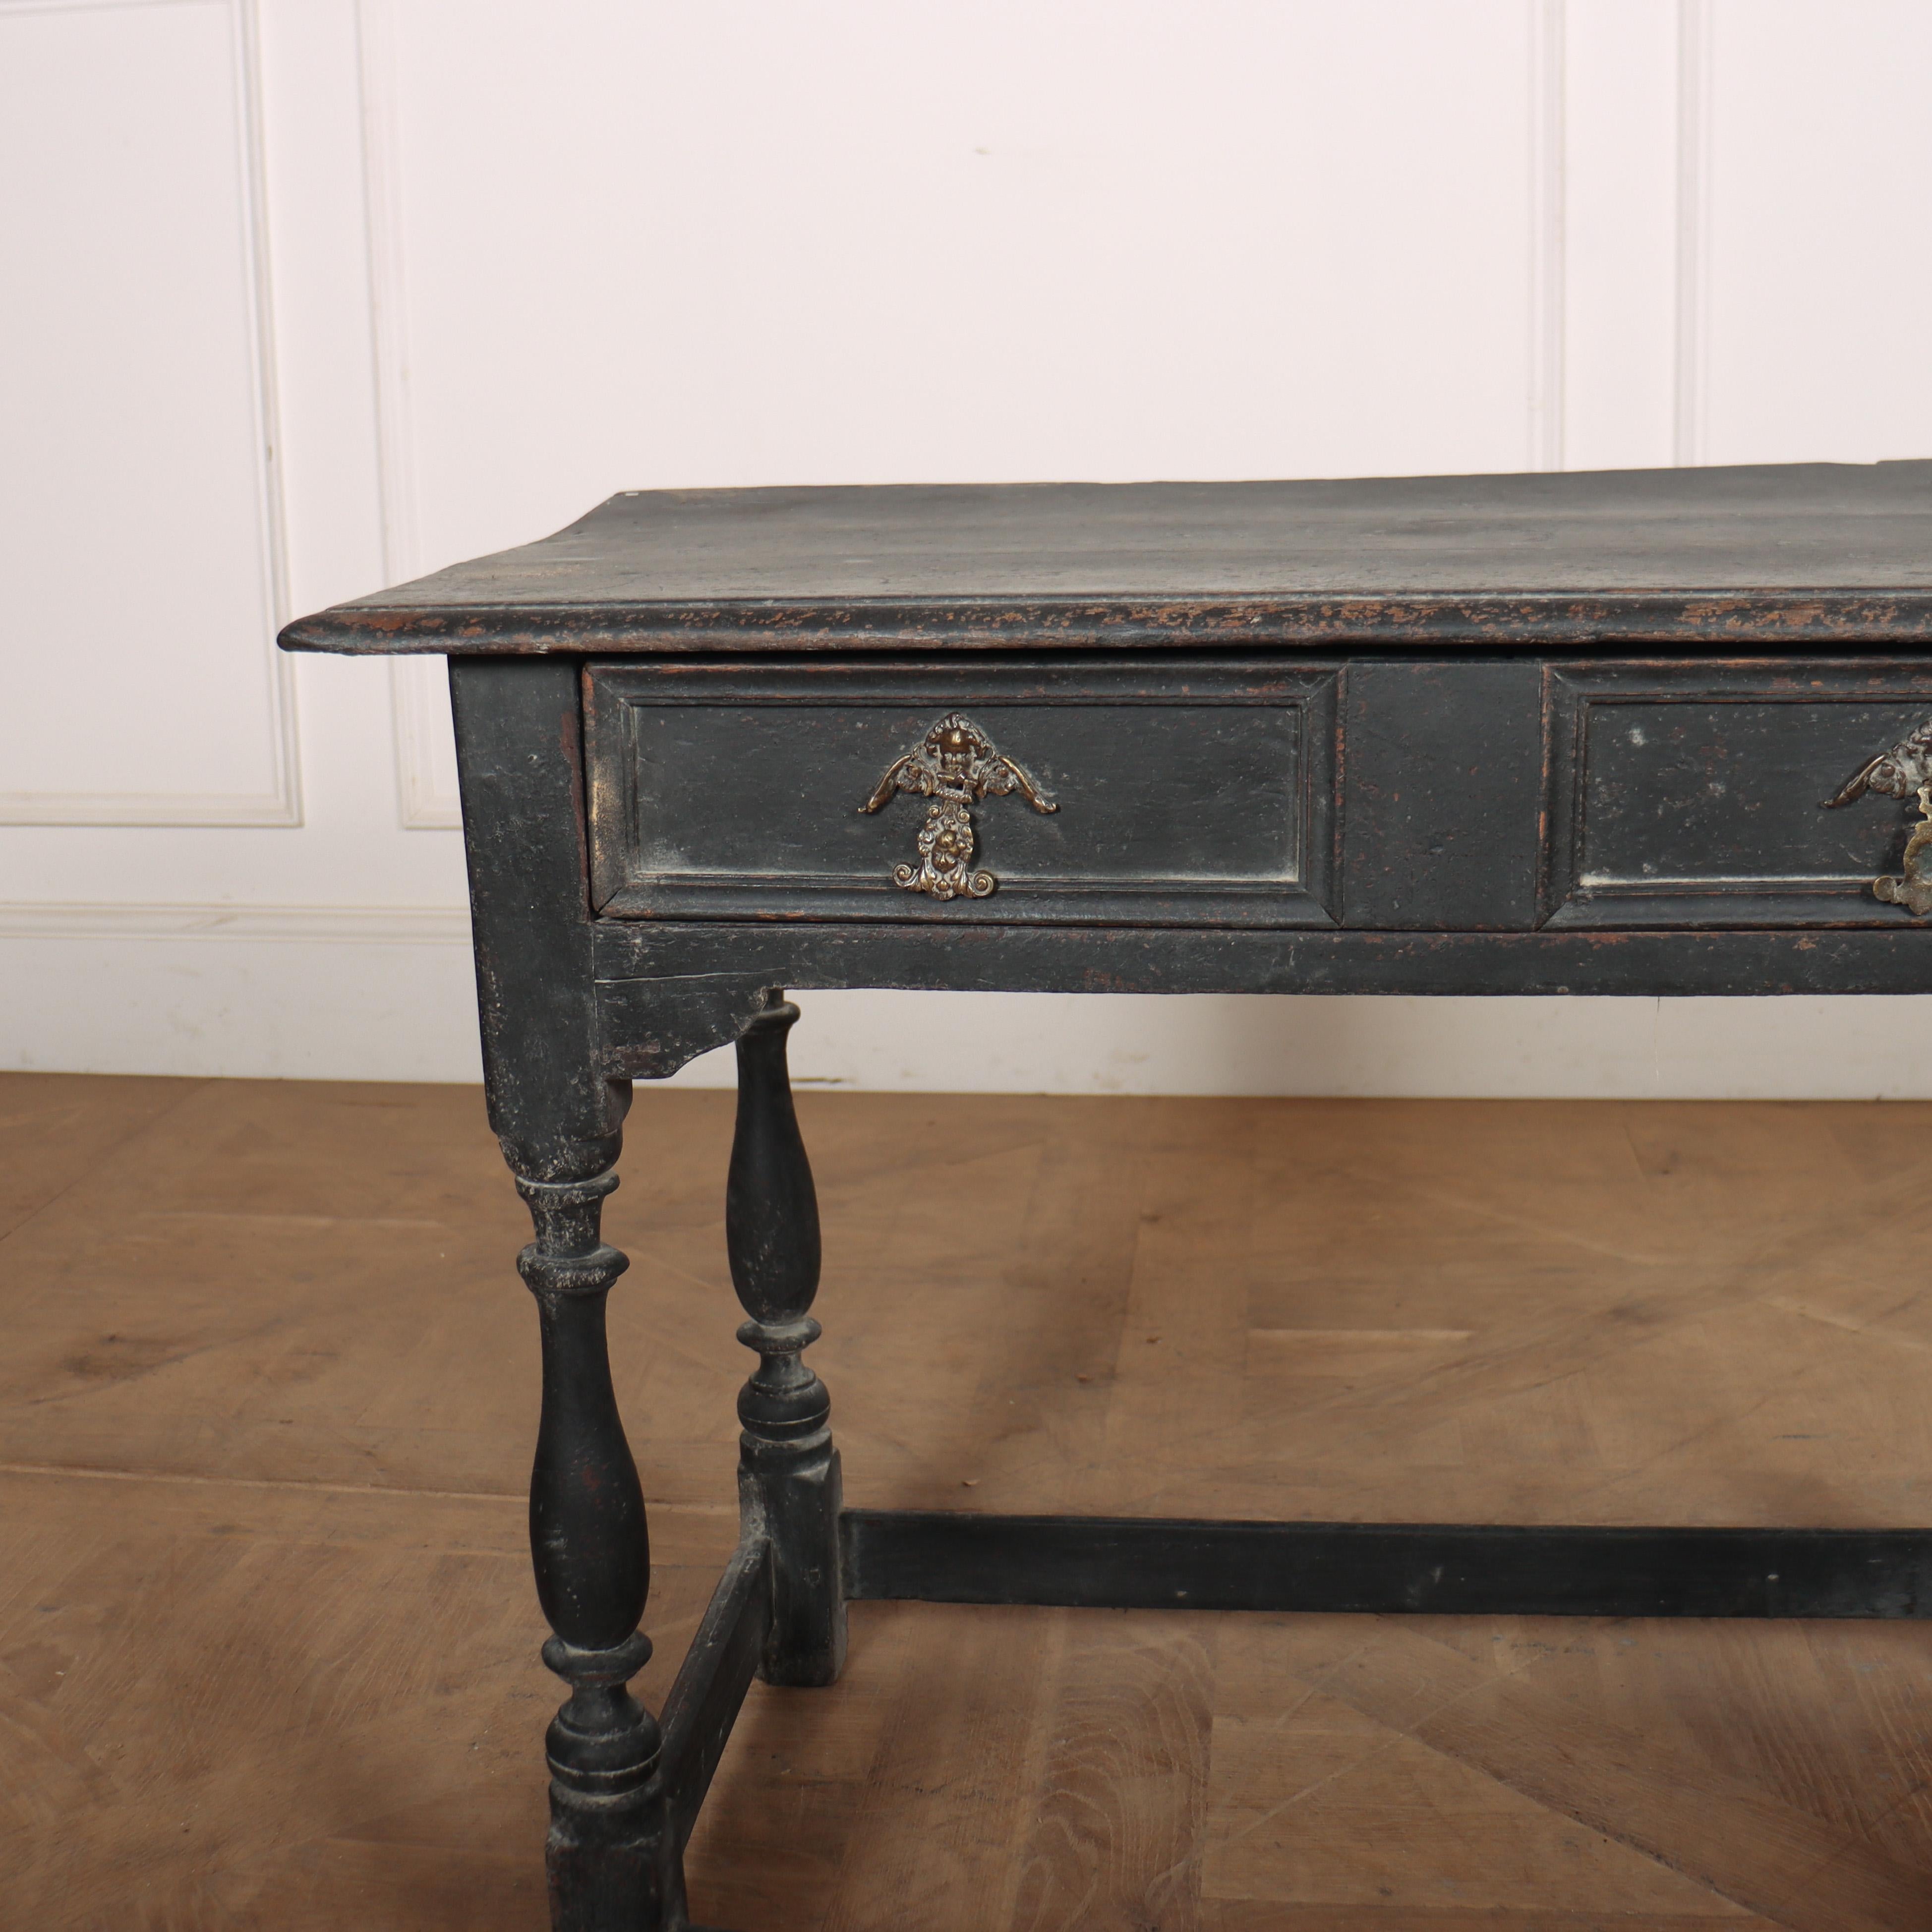 18th C English painted oak lamp table. 1760.

Reference: 8304

Dimensions
33 inches (84 cms) Wide
19 inches (48 cms) Deep
25.5 inches (65 cms) High